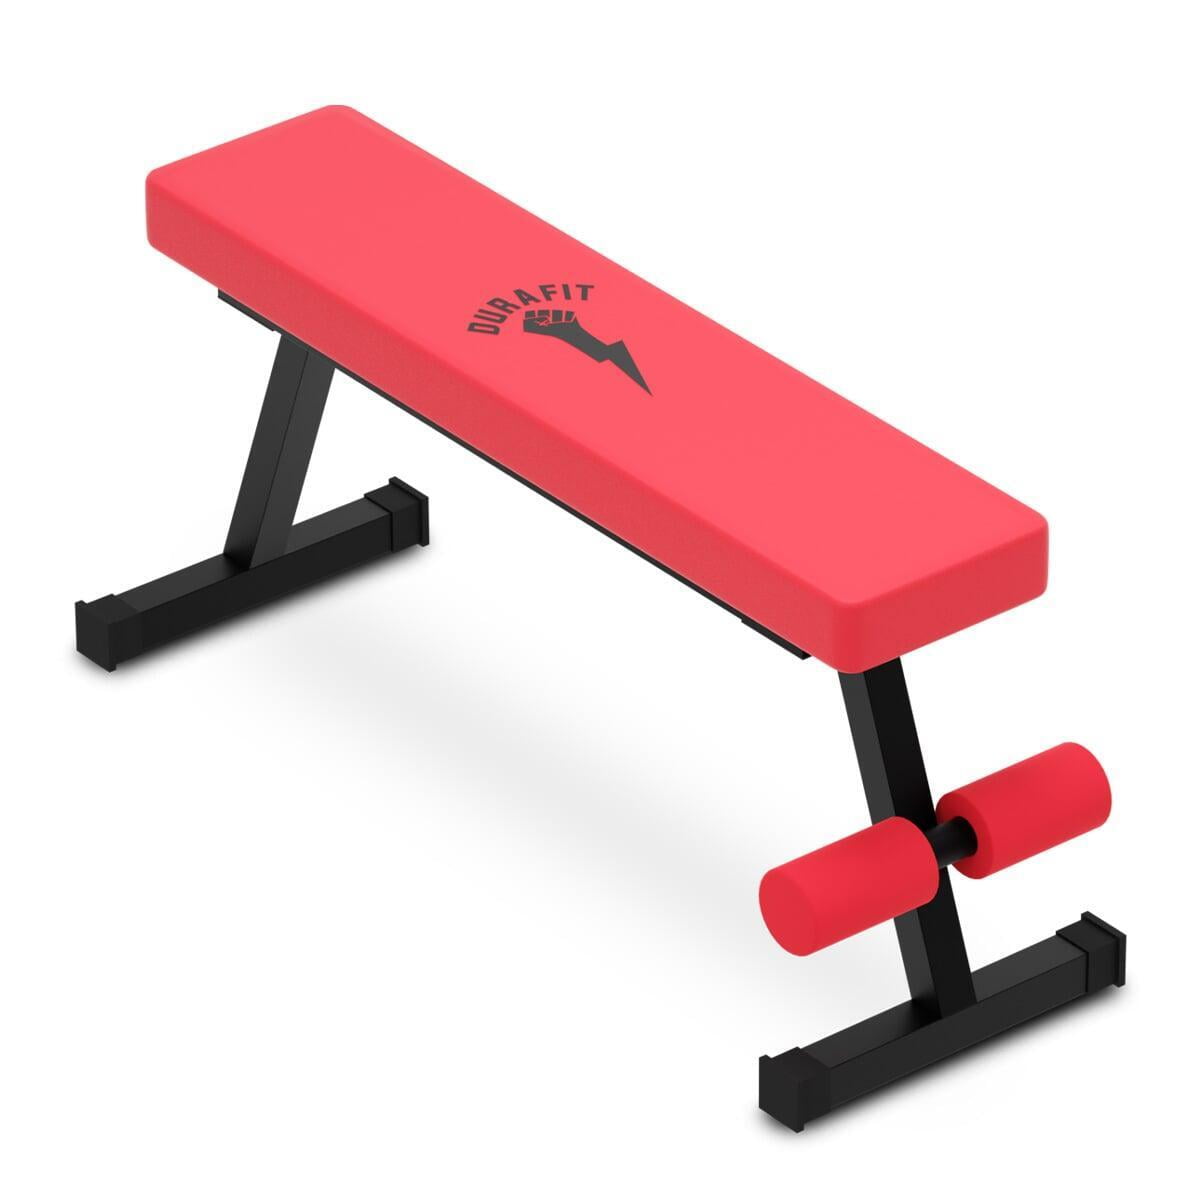 Durafit SImple Flat Bench- Red